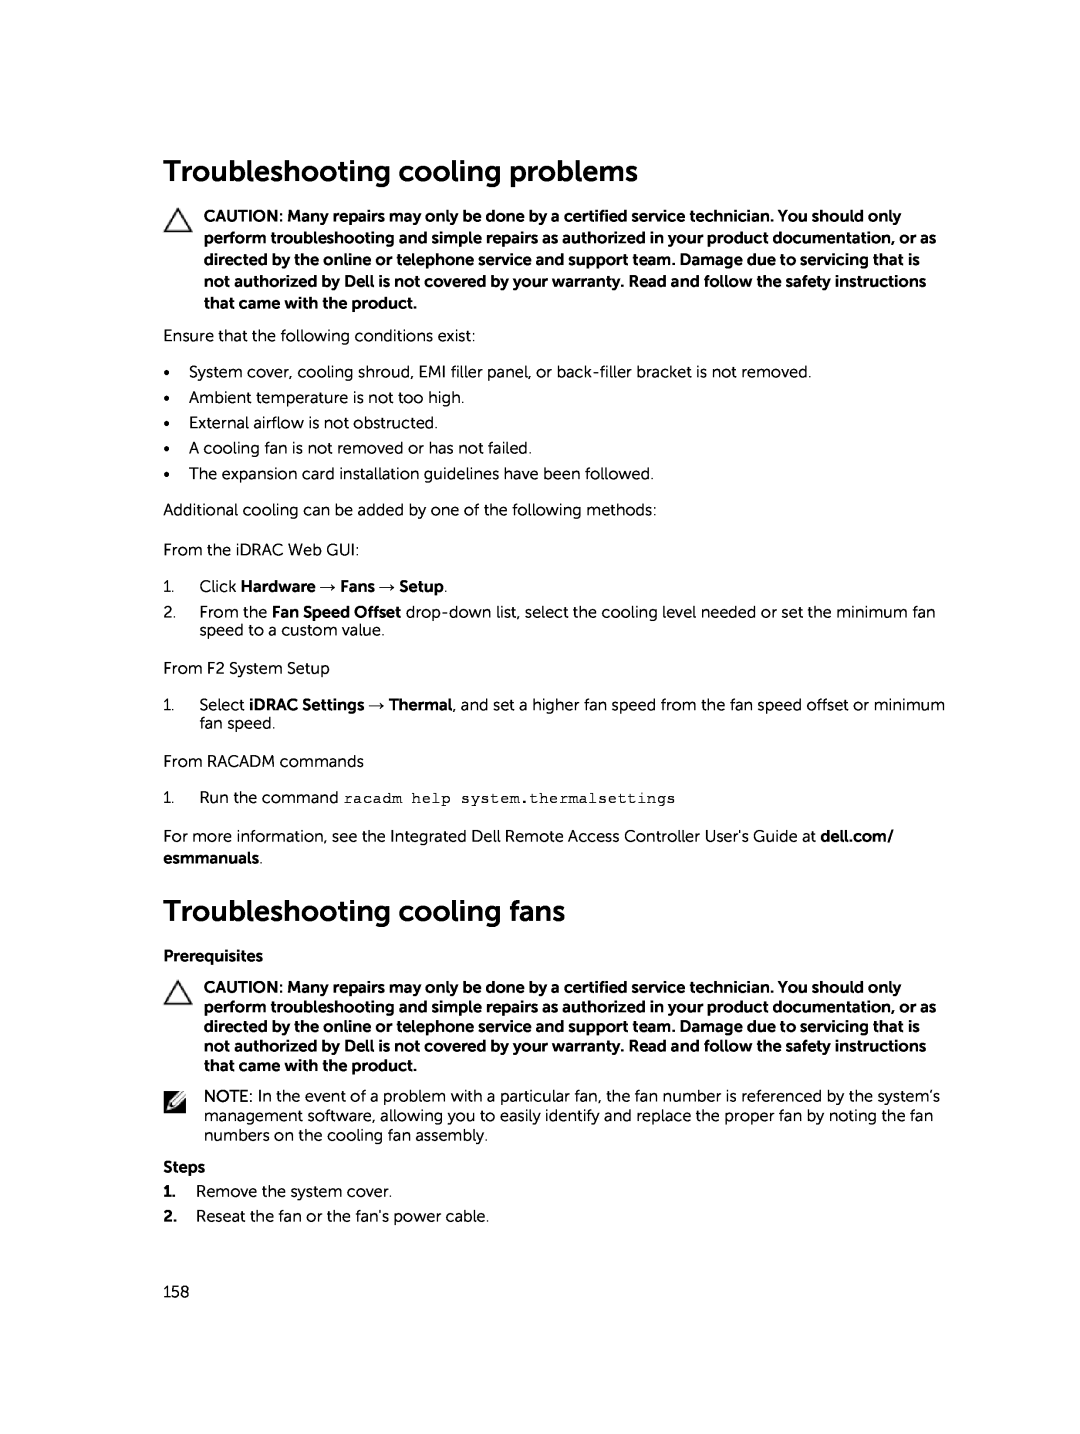 Dell E30S owner manual Troubleshooting cooling problems, Troubleshooting cooling fans 